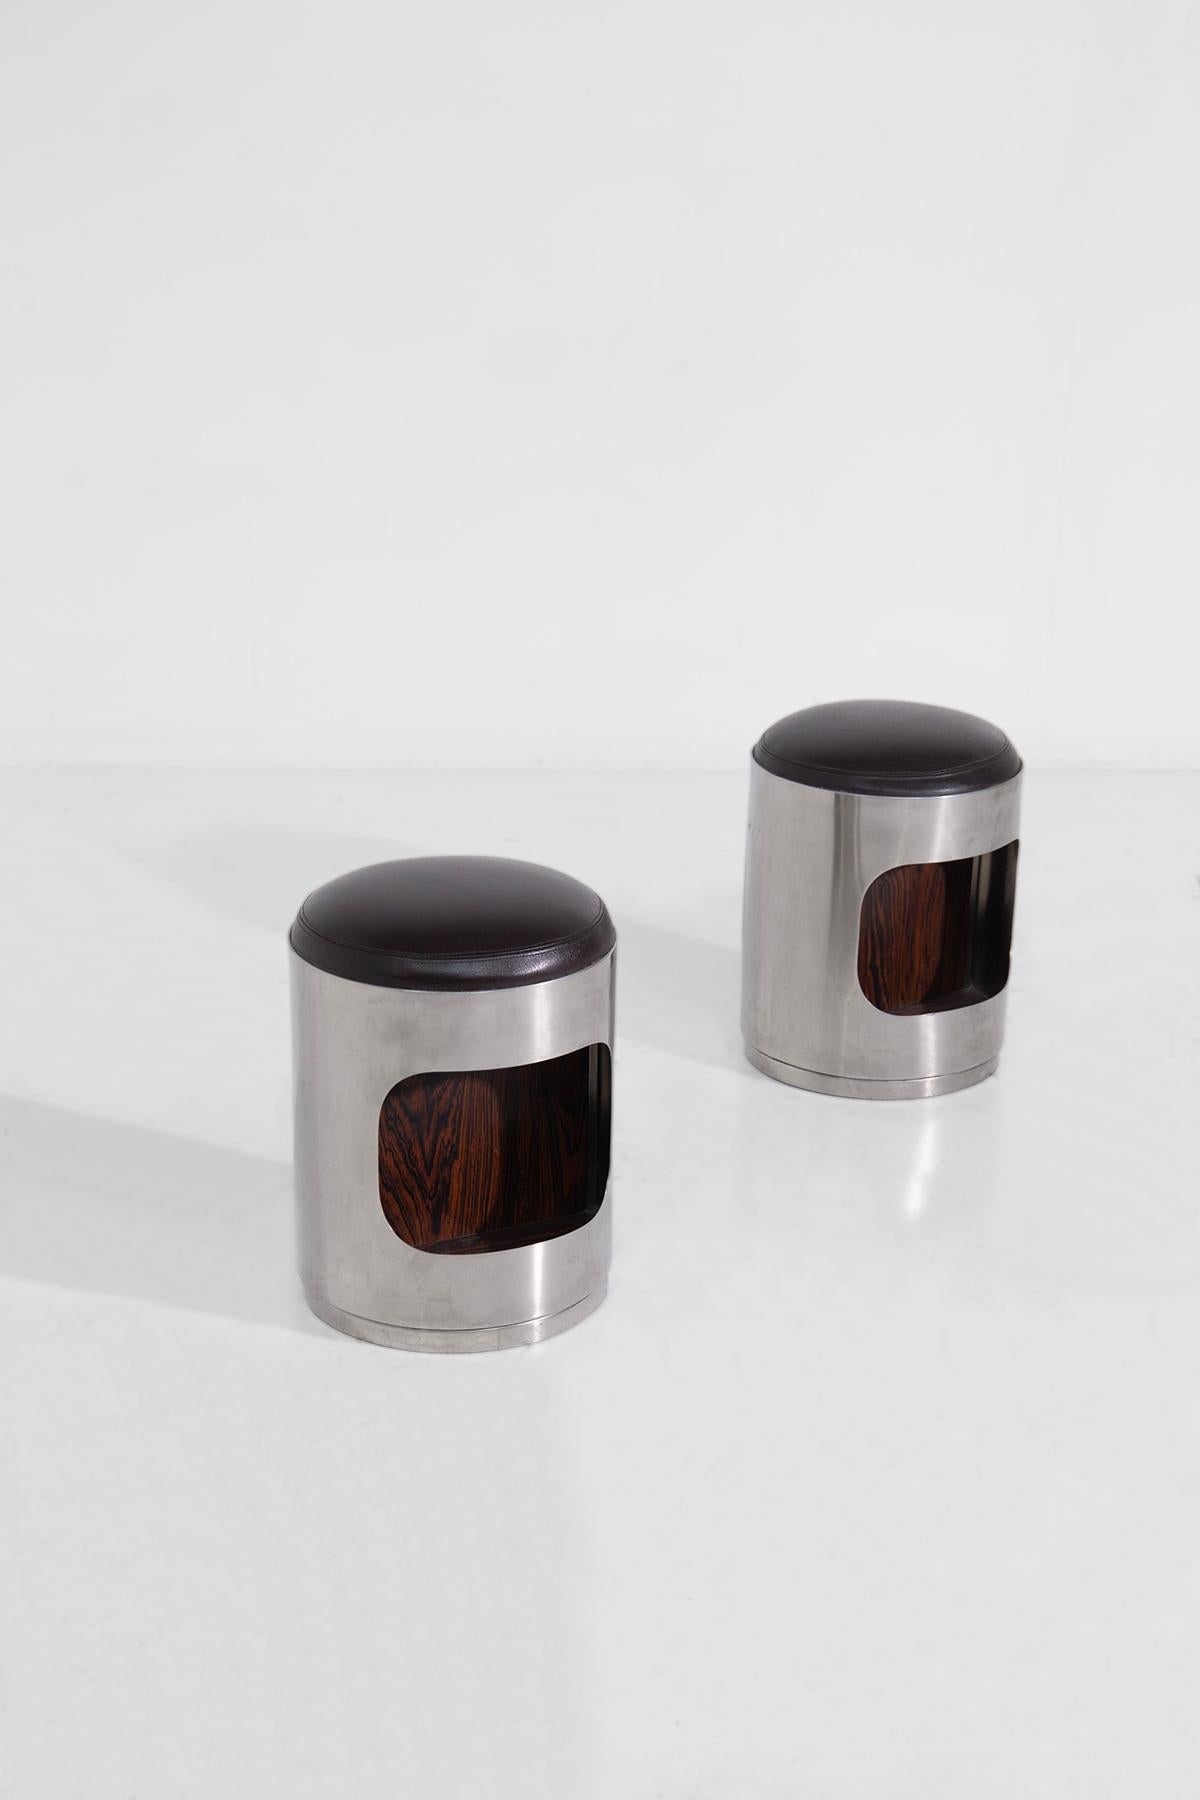 Step into the realm of visionary design with this iconic pair of stools from the 1960s, attributed to the illustrious Vittorio Introini. This duo stands as a monument to the era's bold exploration of form and function, encapsulating the spirit of